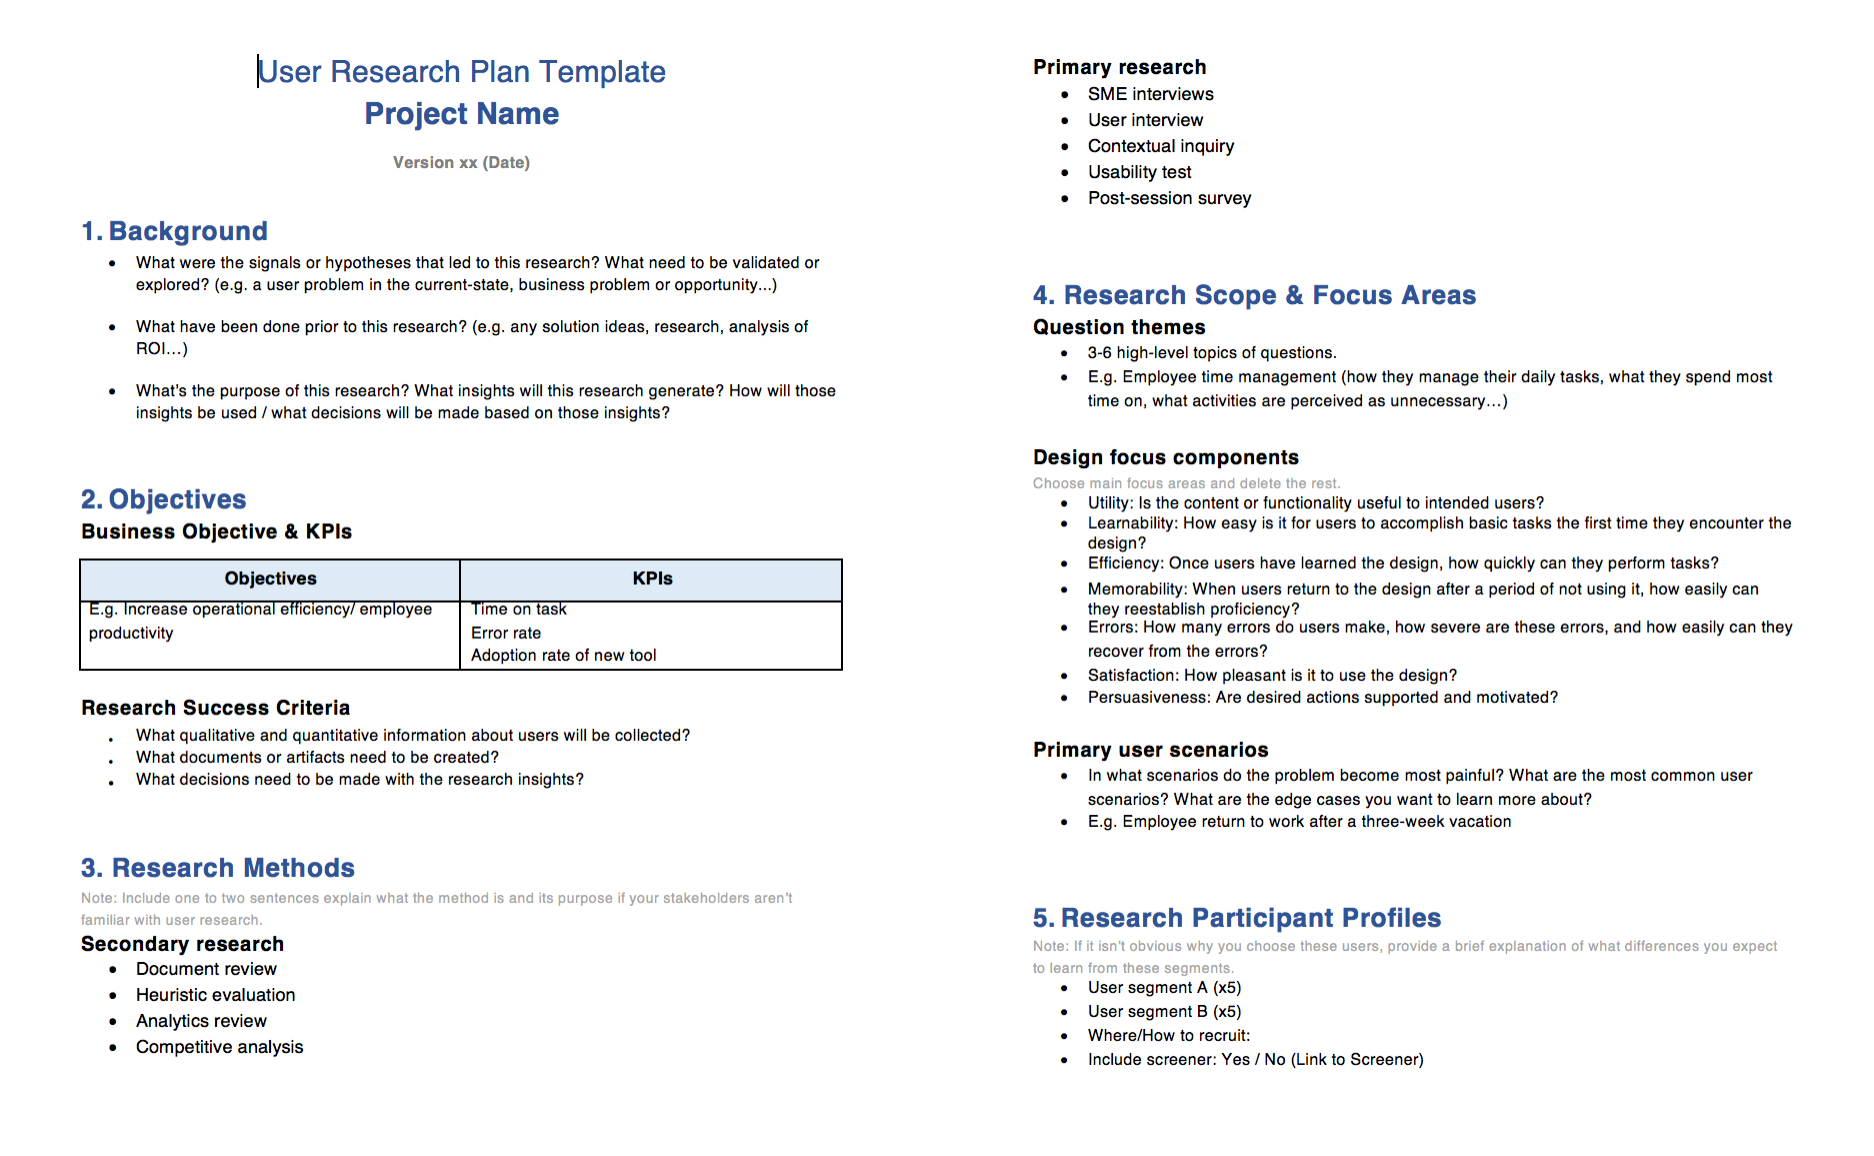 An example of a research plan